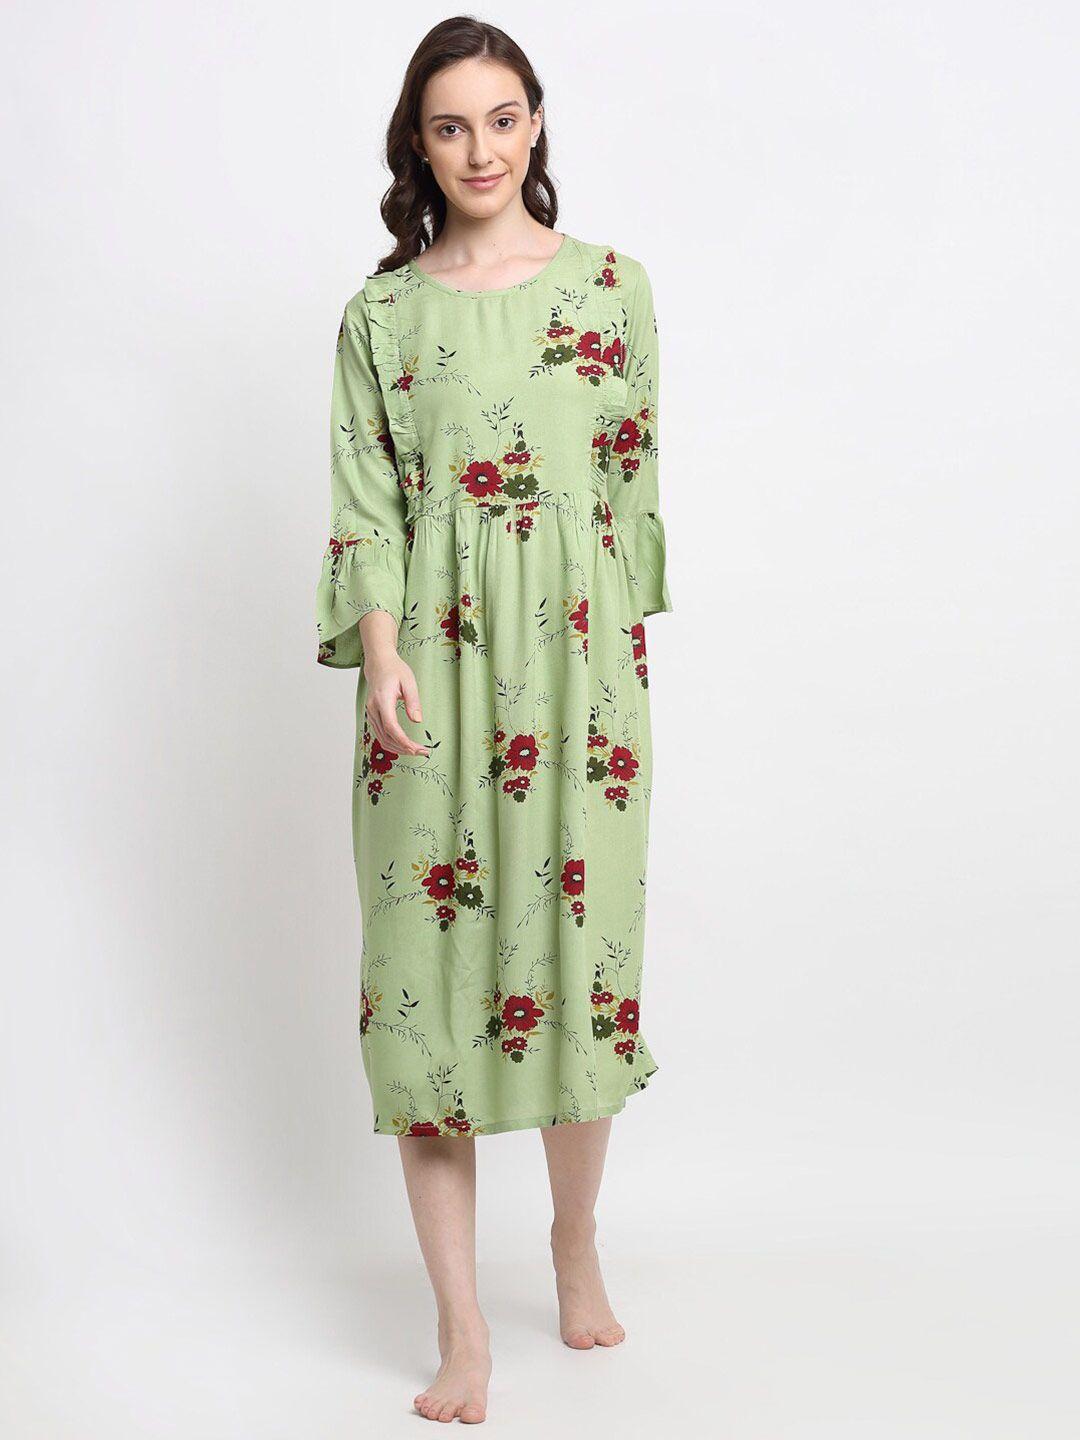 katn-india-maternity-green-printed-floral-nightdress